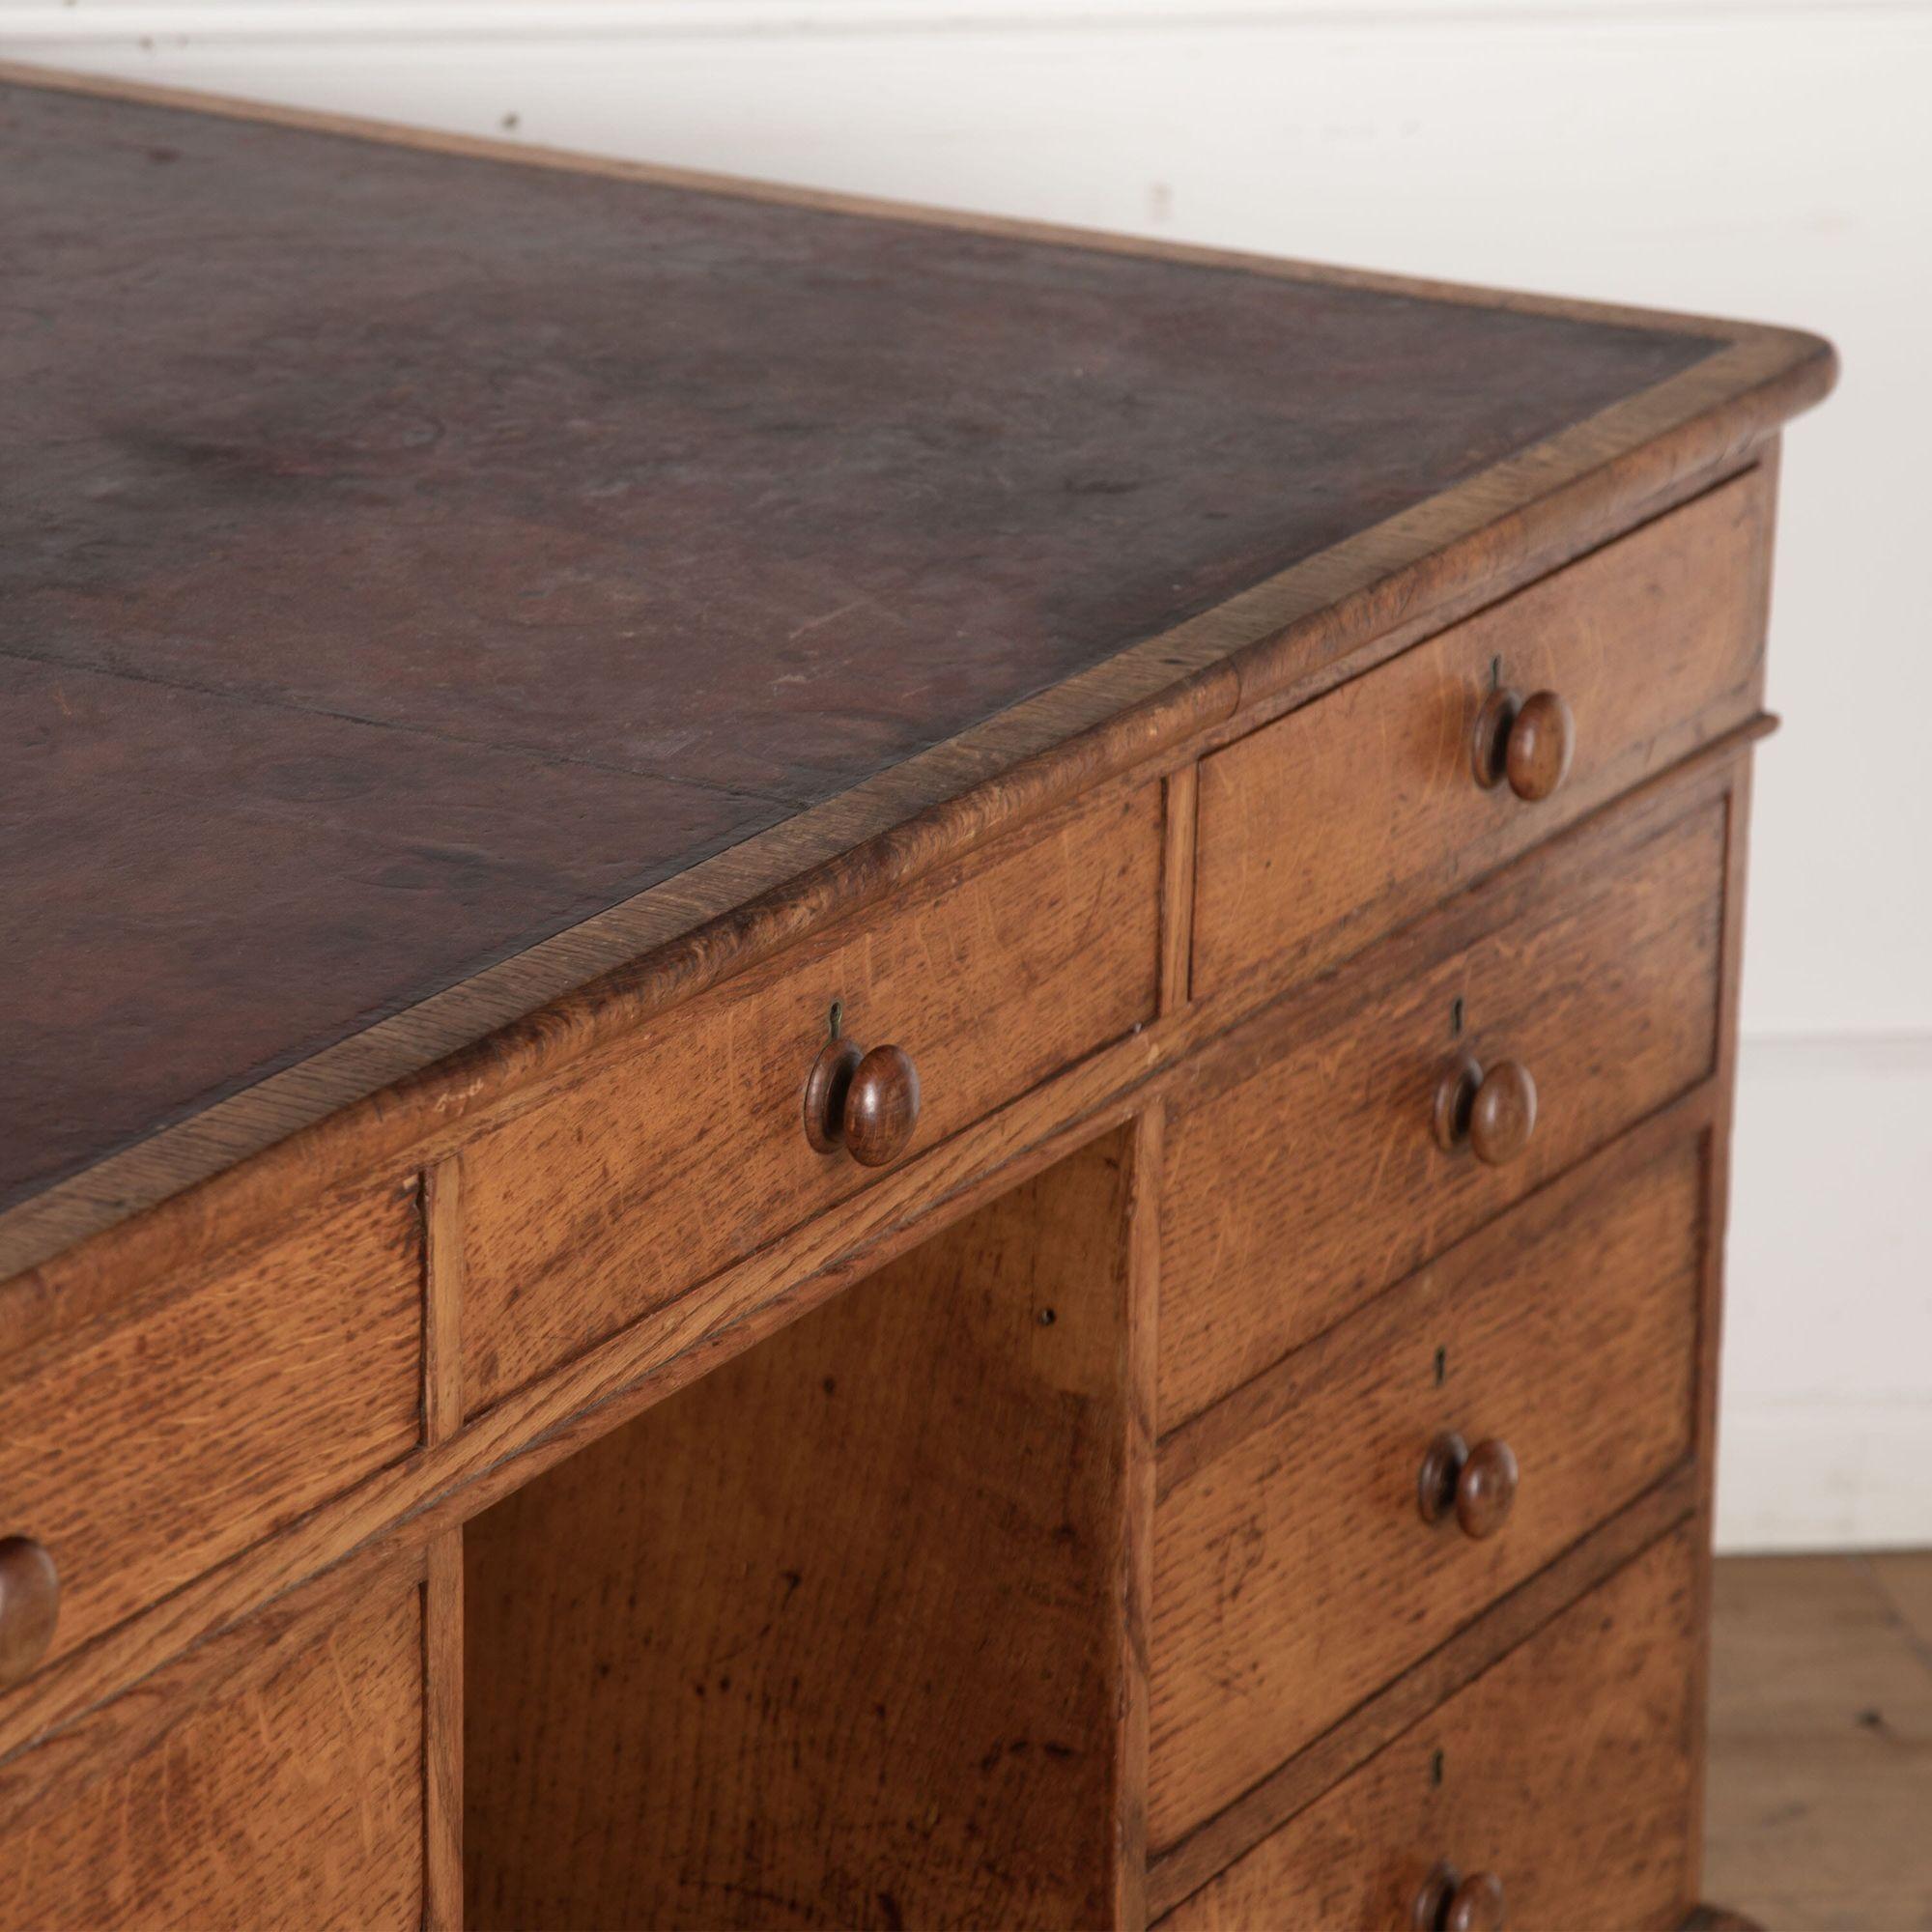 19th century oak partners desk with its original tooled red leather writing surface on top, surrounded by a cross banded border.
Three drawers in the frieze on one side, with a bank of three drawers below, having pull handles.
The pedestals on the